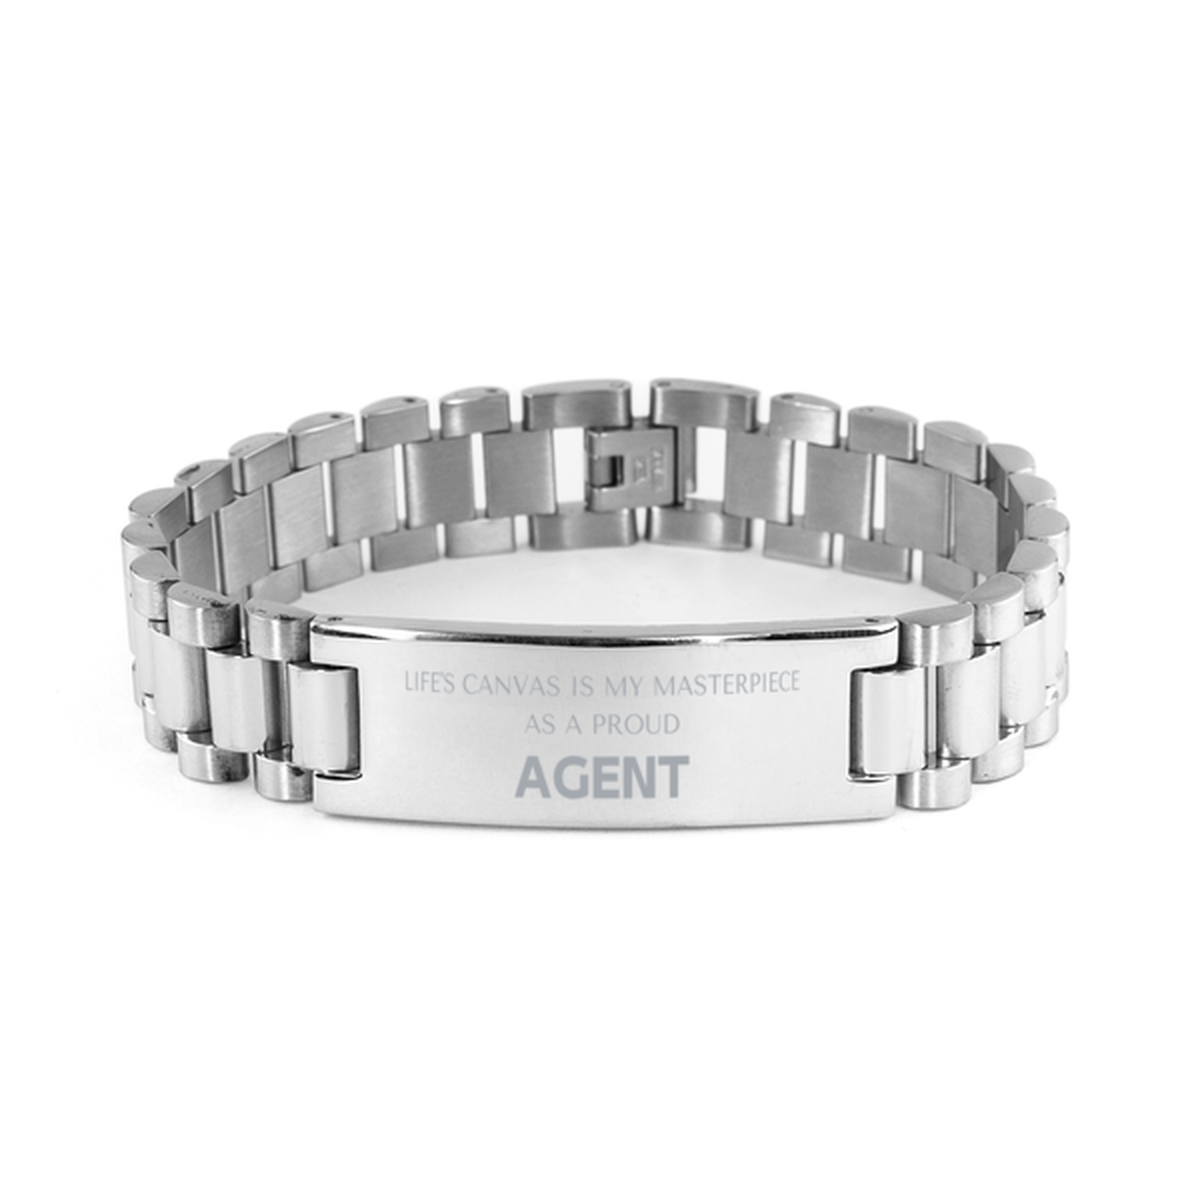 Proud Agent Gifts, Life's canvas is my masterpiece, Epic Birthday Christmas Unique Ladder Stainless Steel Bracelet For Agent, Coworkers, Men, Women, Friends